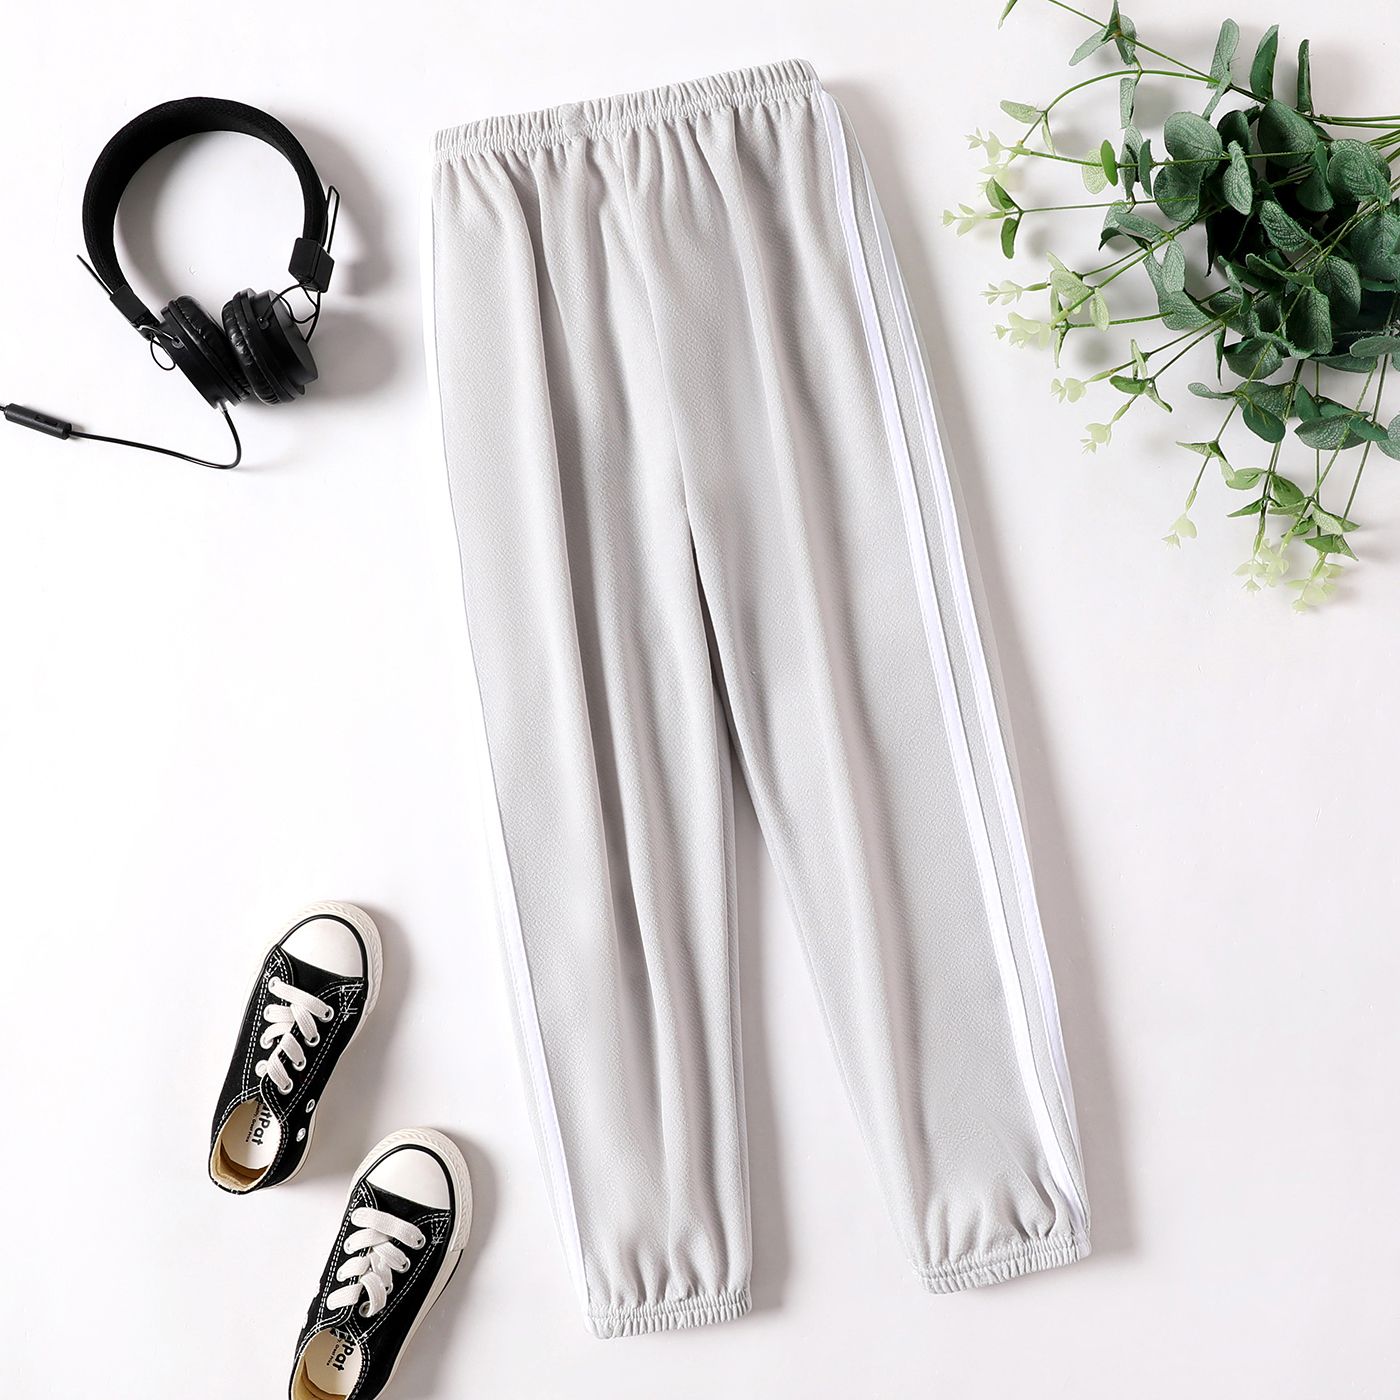 Kid Boy/Kid Girl Sporty Striped Breathable Ankle Length Thin Pants for Summer/Fall